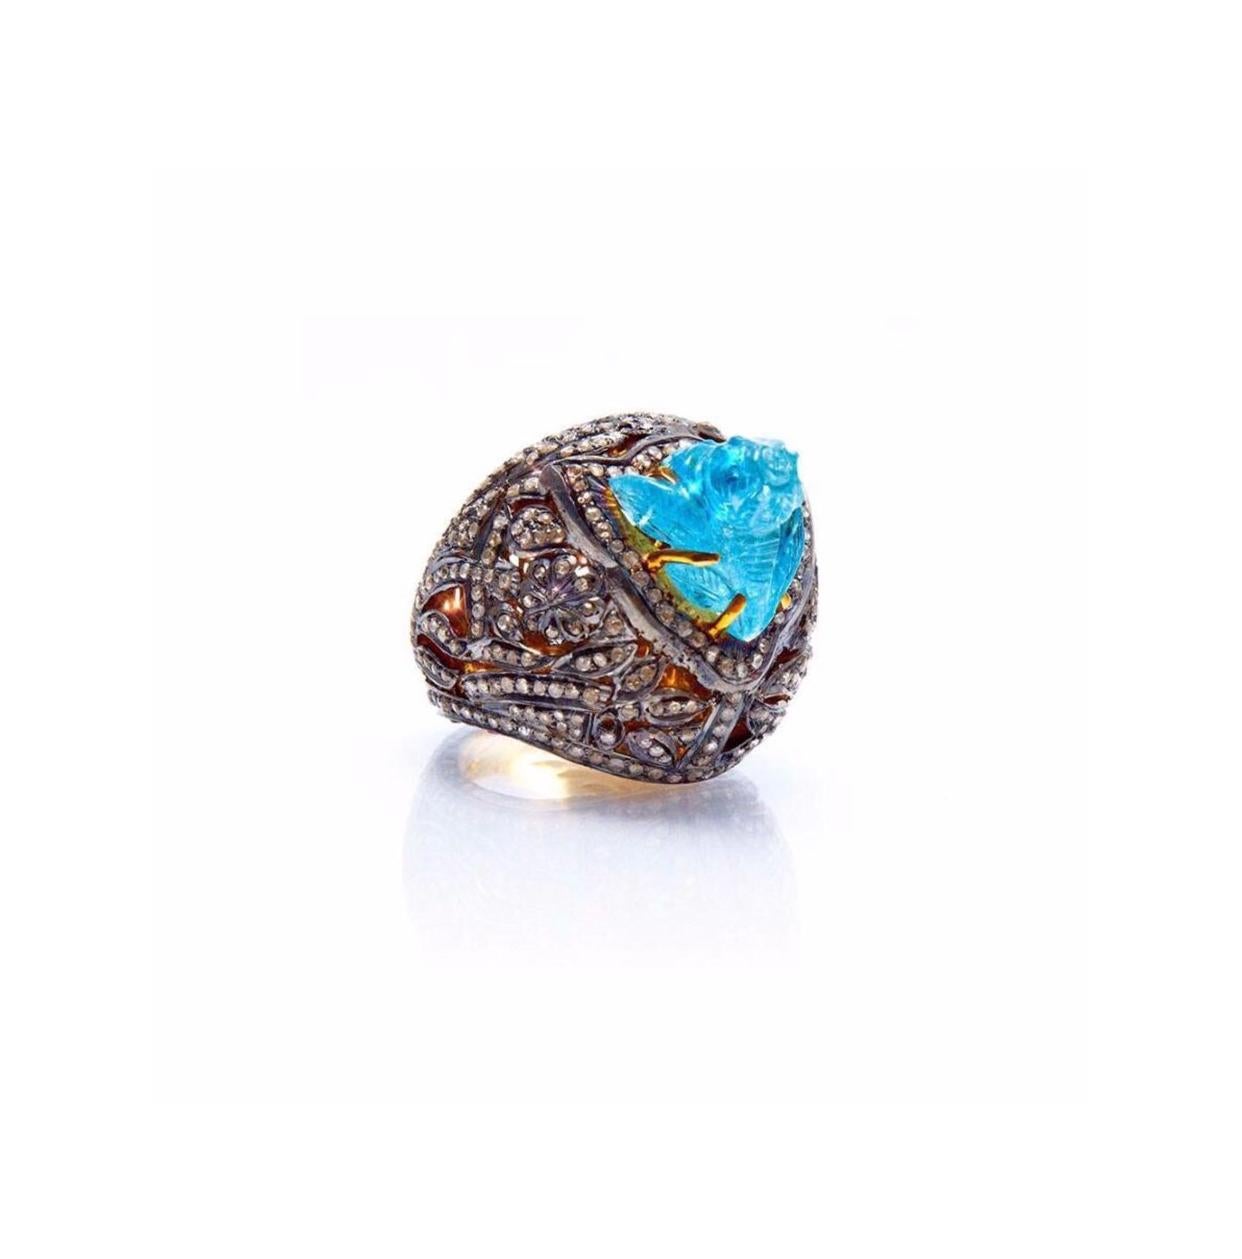 “Aqua Flora”... A vibrant Cabochon Aquamarine flower dramatically set upon a large filigree dome of sparkling White Diamonds in a fabulous Blackened Silver cocktail ring with a contrasting 18 Karat Gold interior.

- Natural Aquamarine weight approx